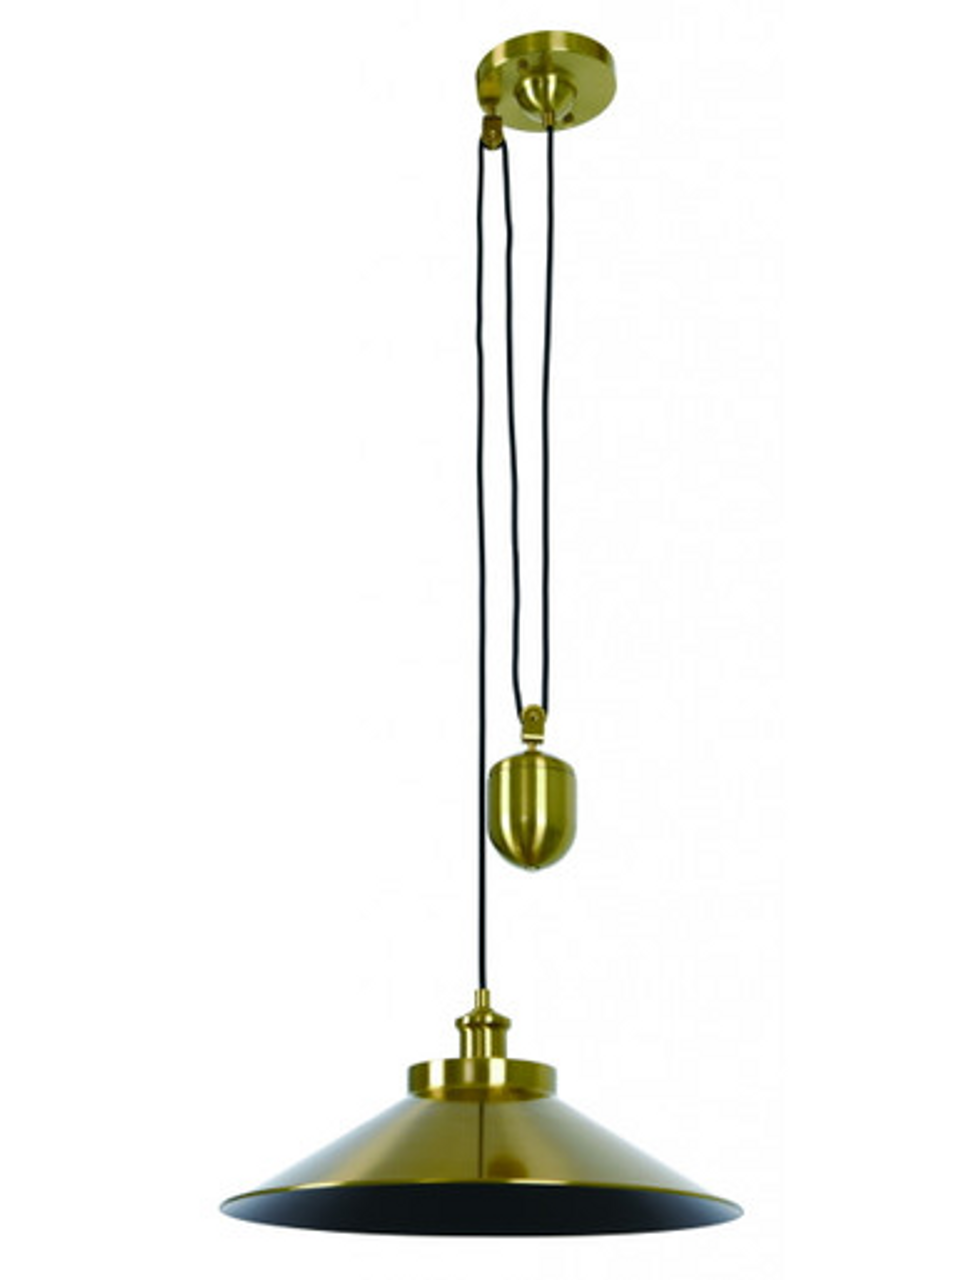 Brass pendant with rise and fall pulley system